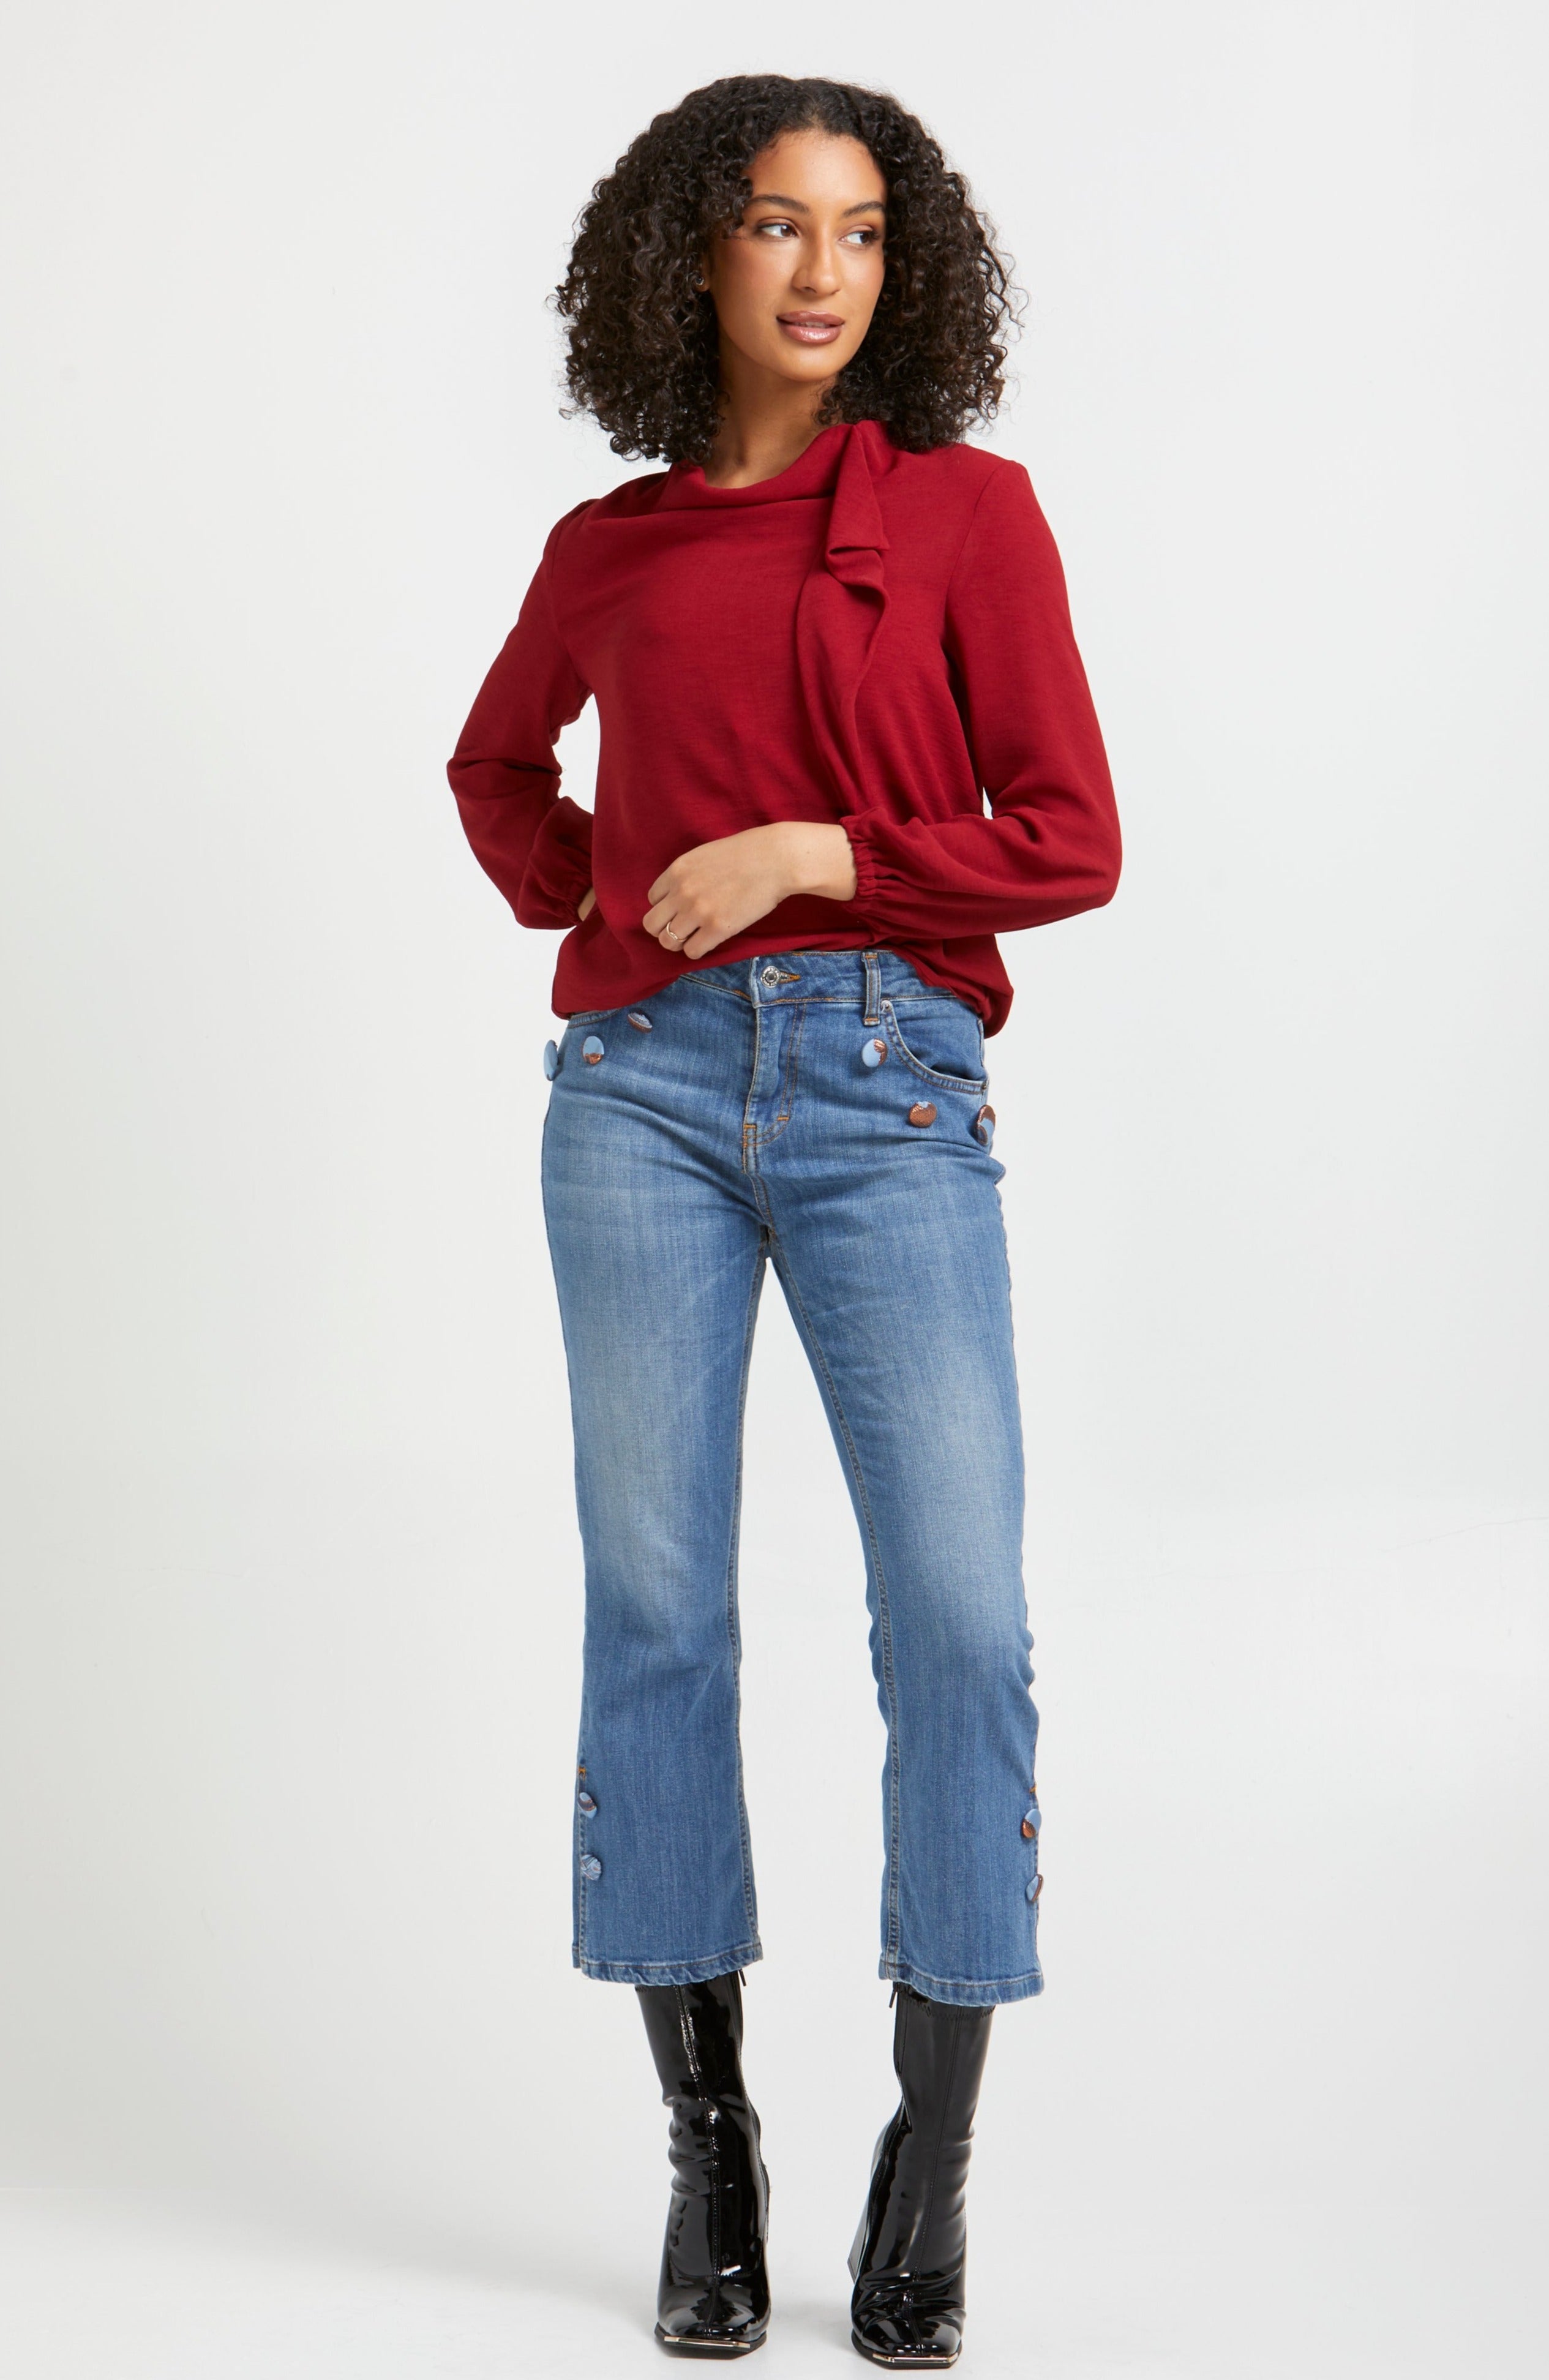 AnnaCristy Milano High Rise Cropped Cotton Jeans with Adelina Red Ruffle Blouse- Made in Italy